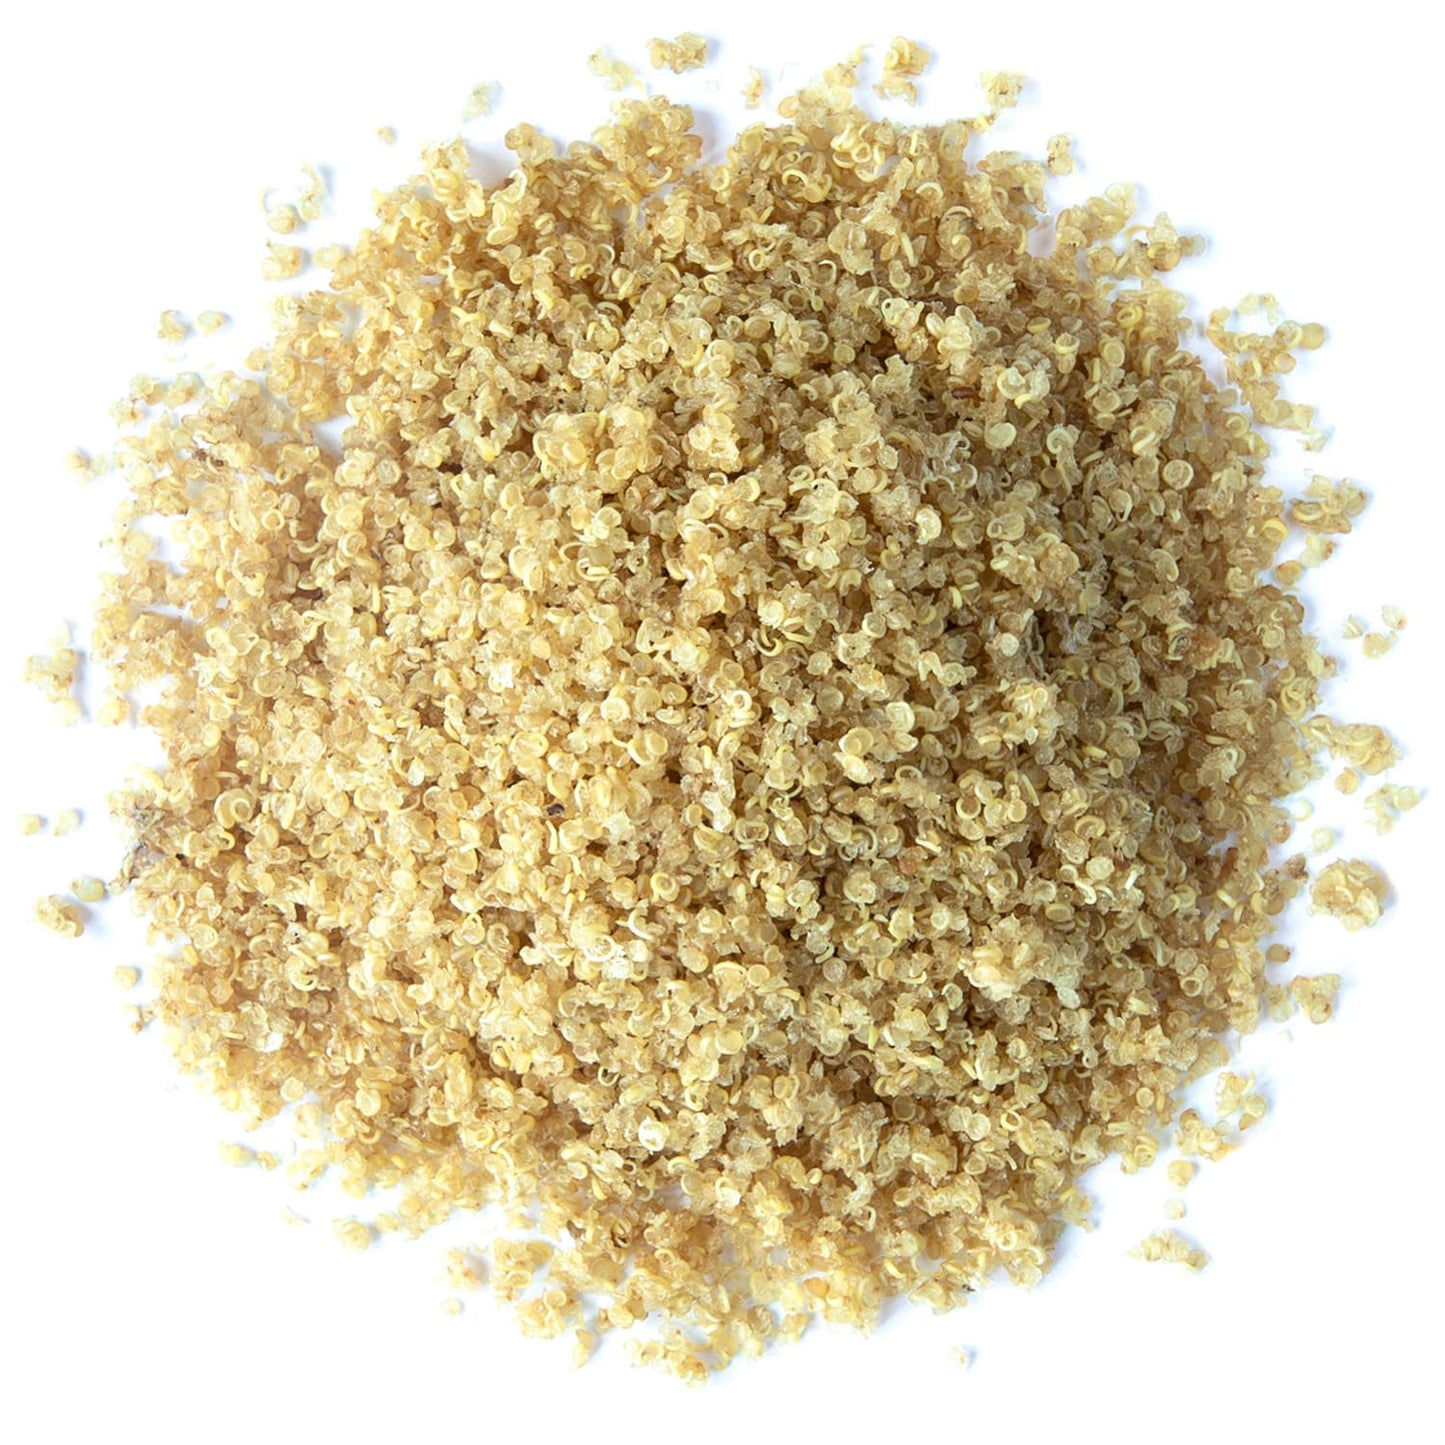 Organic Pre-Cooked White Quinoa - Cooked and then Dehydrated, Non-GMO, Vegan, Kosher, Add Hot Water and Wait 7 Minutes - by Food to Live